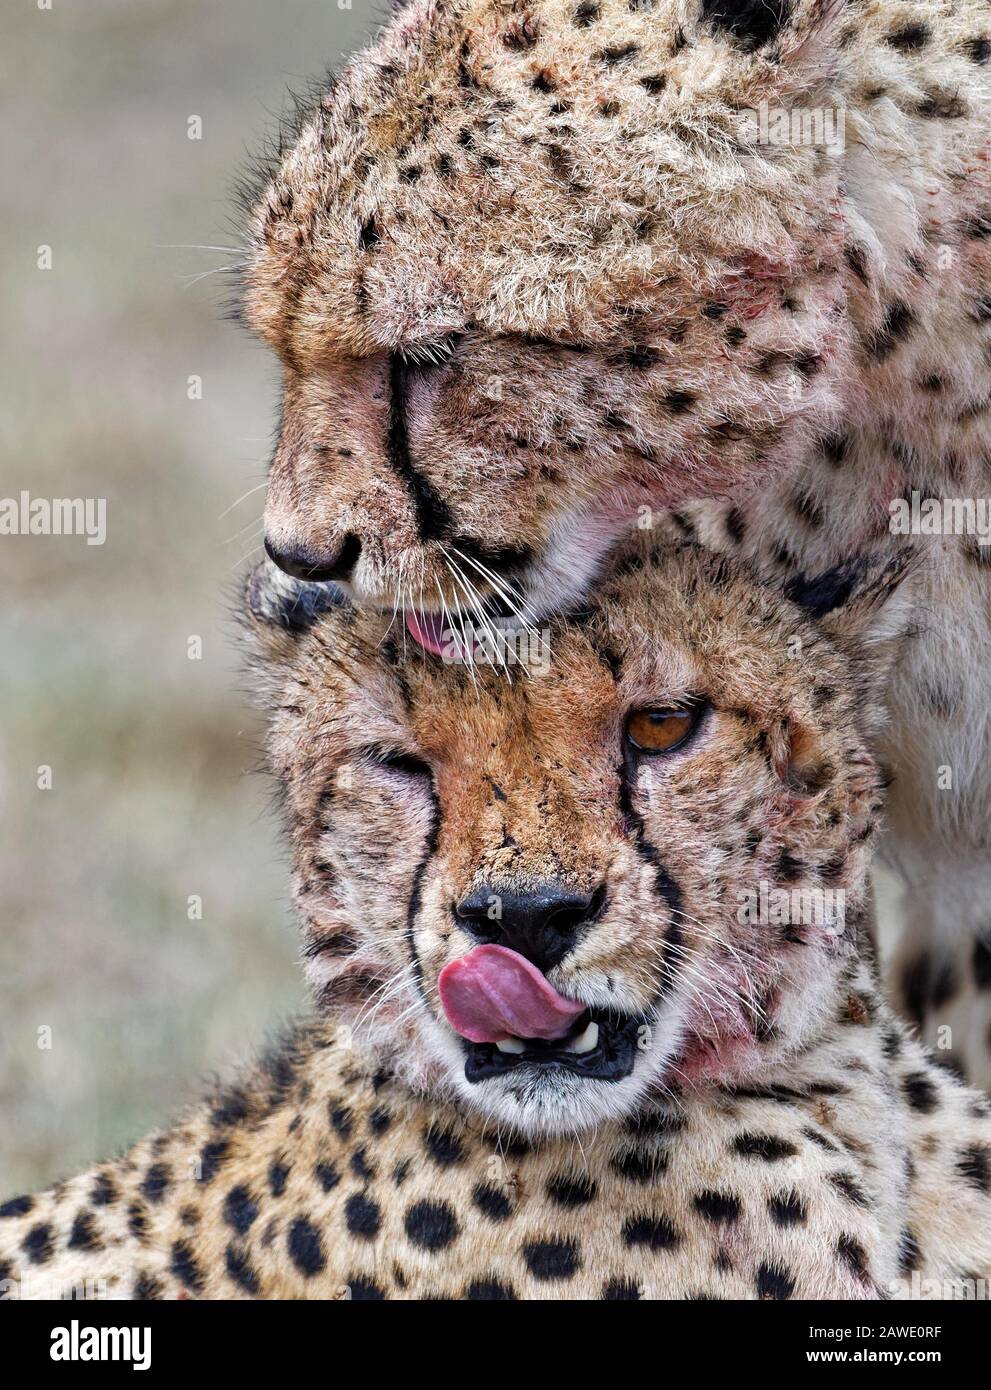 Two Cheetahs (Acinonyx jubatus) licking blood from their faces after eating in the rain, animal portrait, Masai Mara National Reserve, Kenya Stock Photo